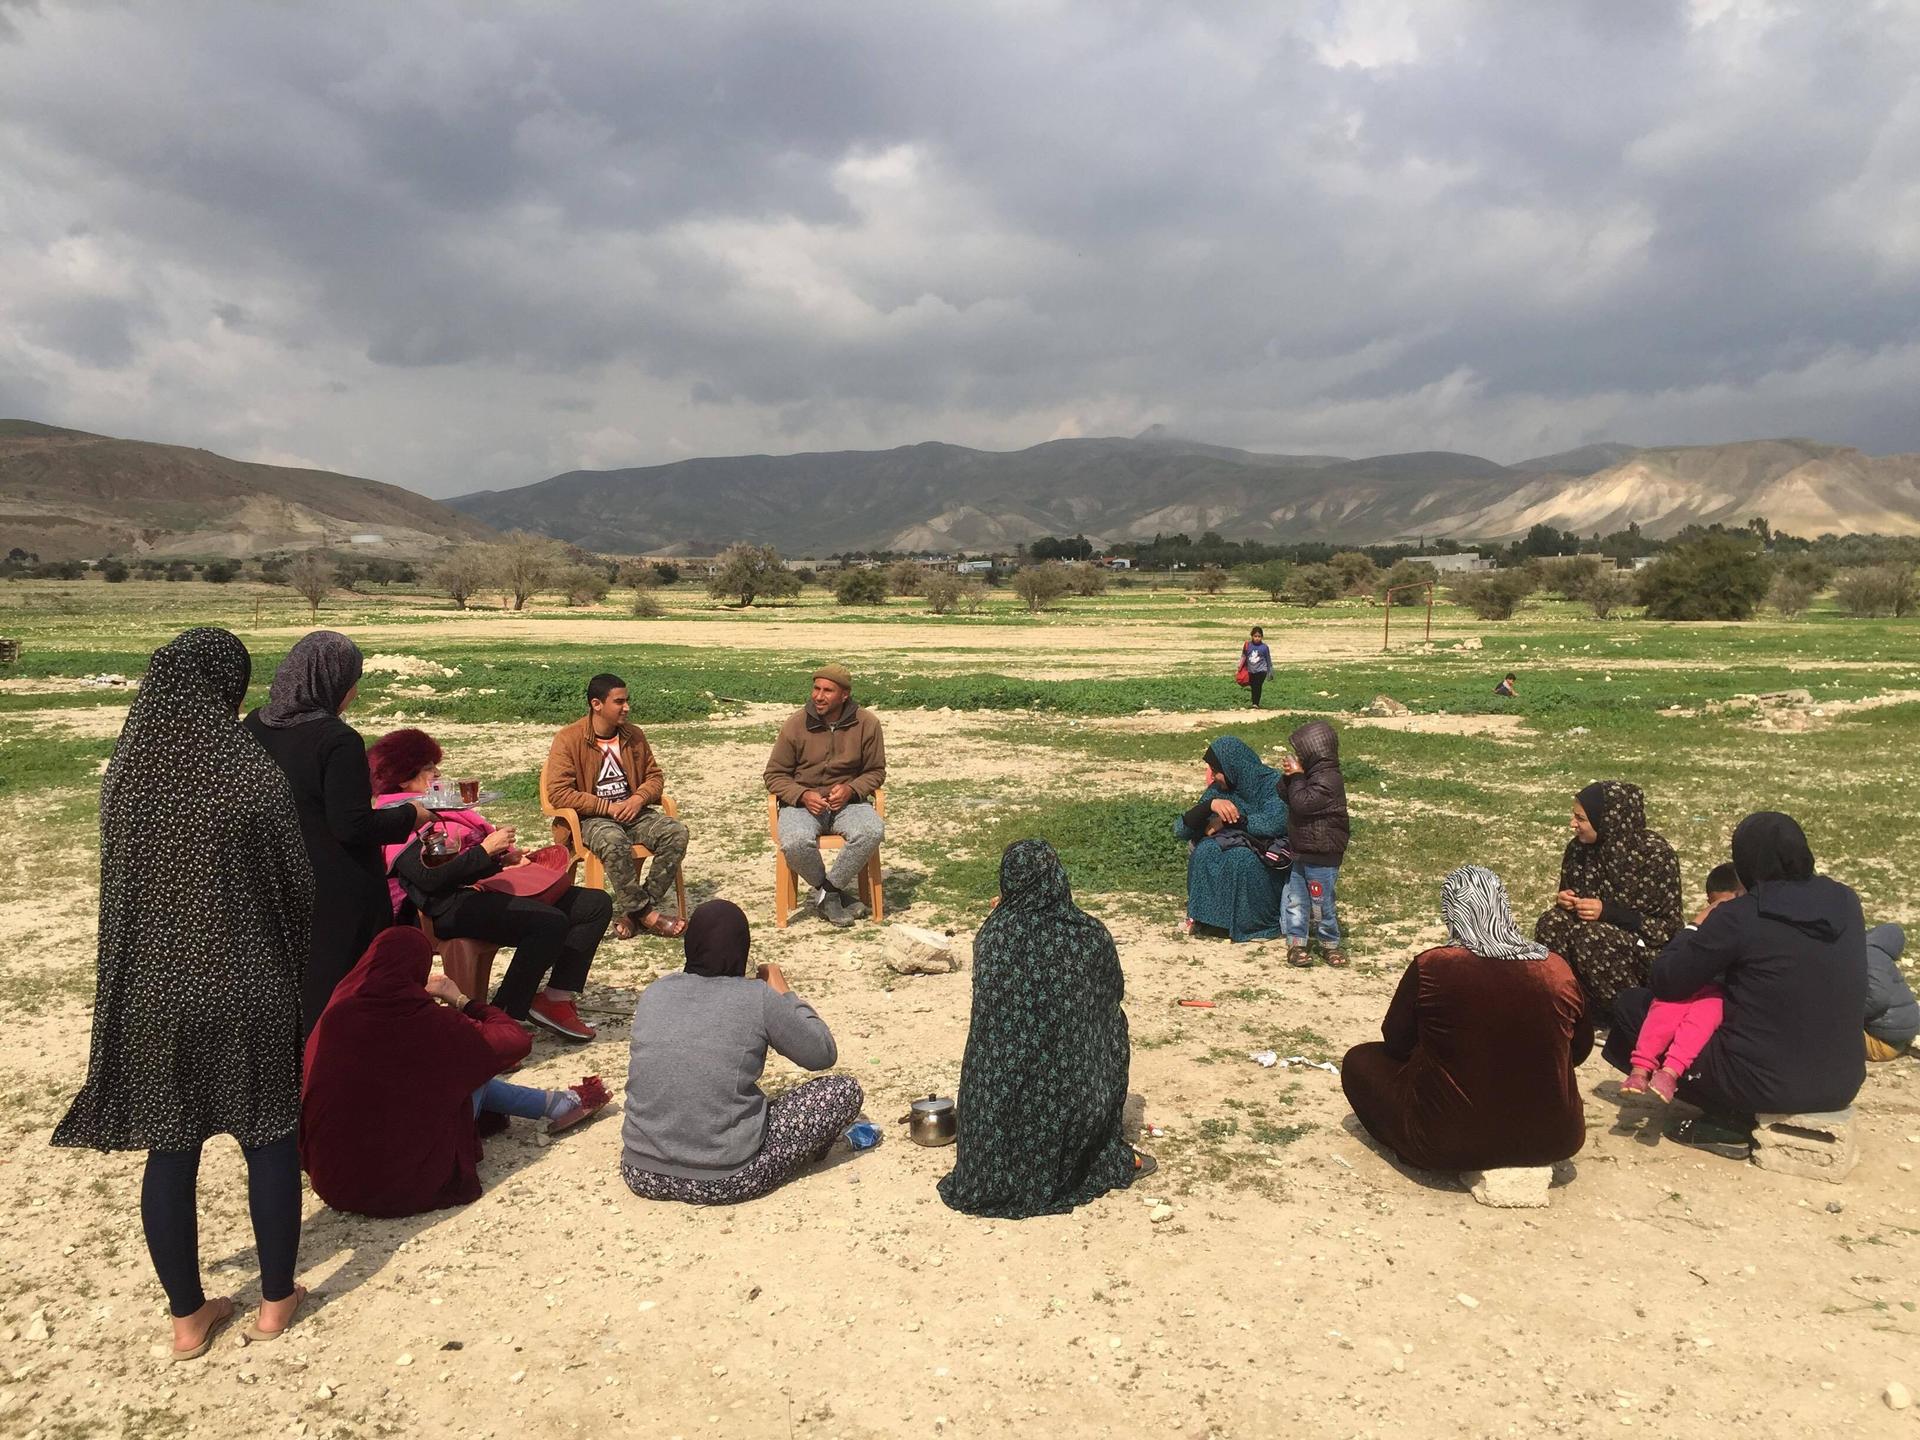 Palestinian residents of the village of Fasayil in the Jordan Valley sit together for an afternoon tea break.